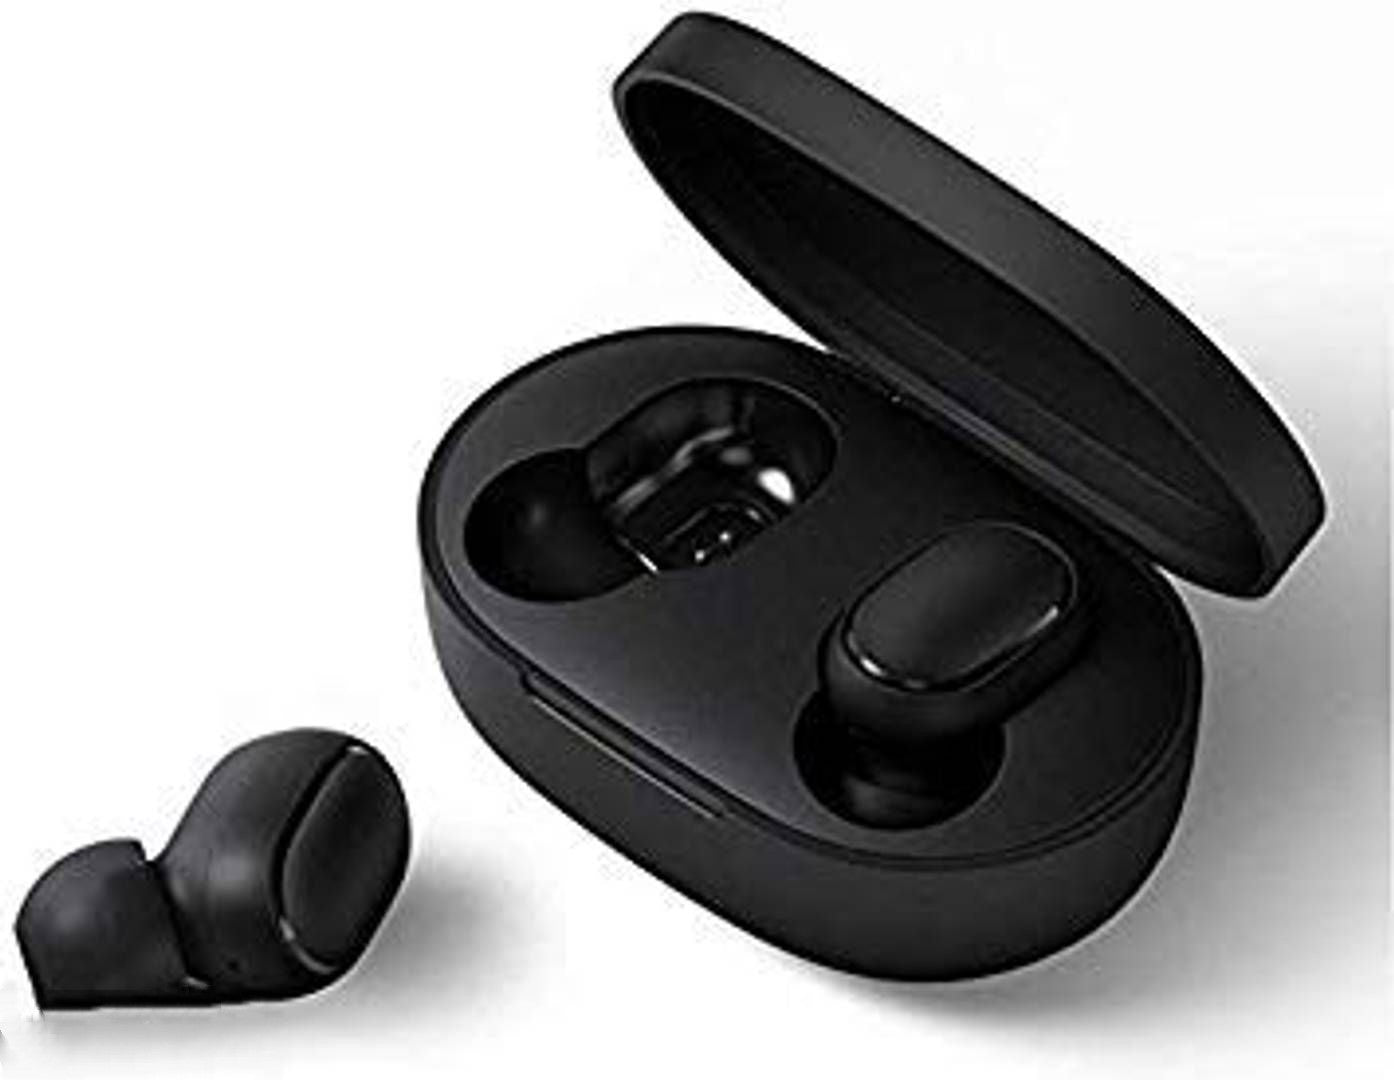 True Wireless Noise Cancelling Earbuds Built-in Microphone IPX4 Rating Earphones